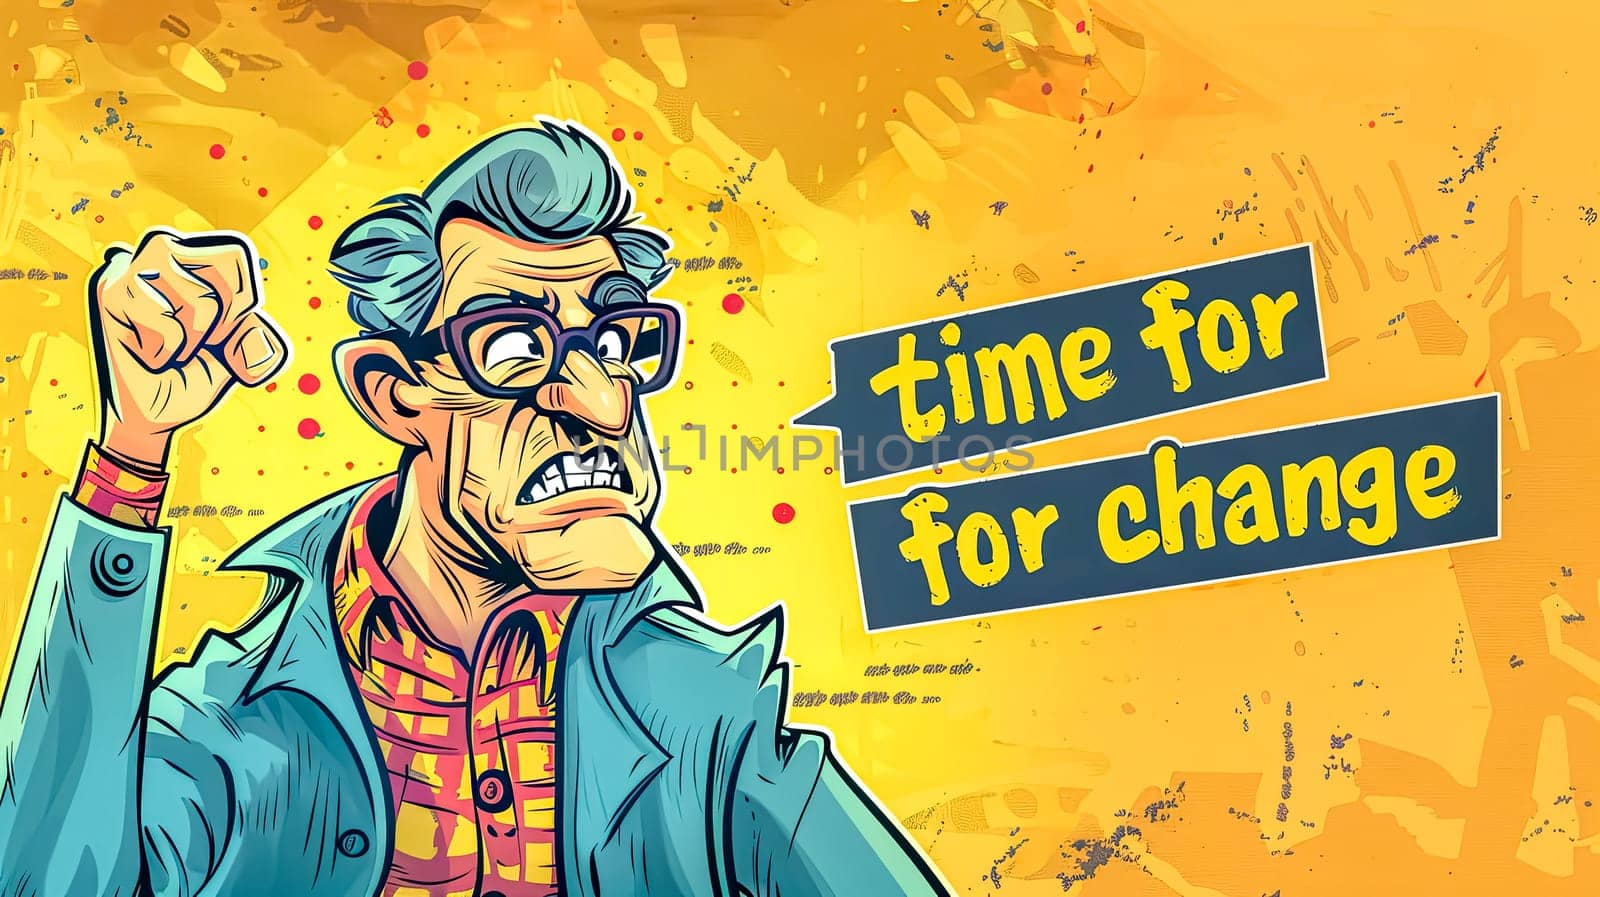 Determined cartoon man with time for change banner by Edophoto